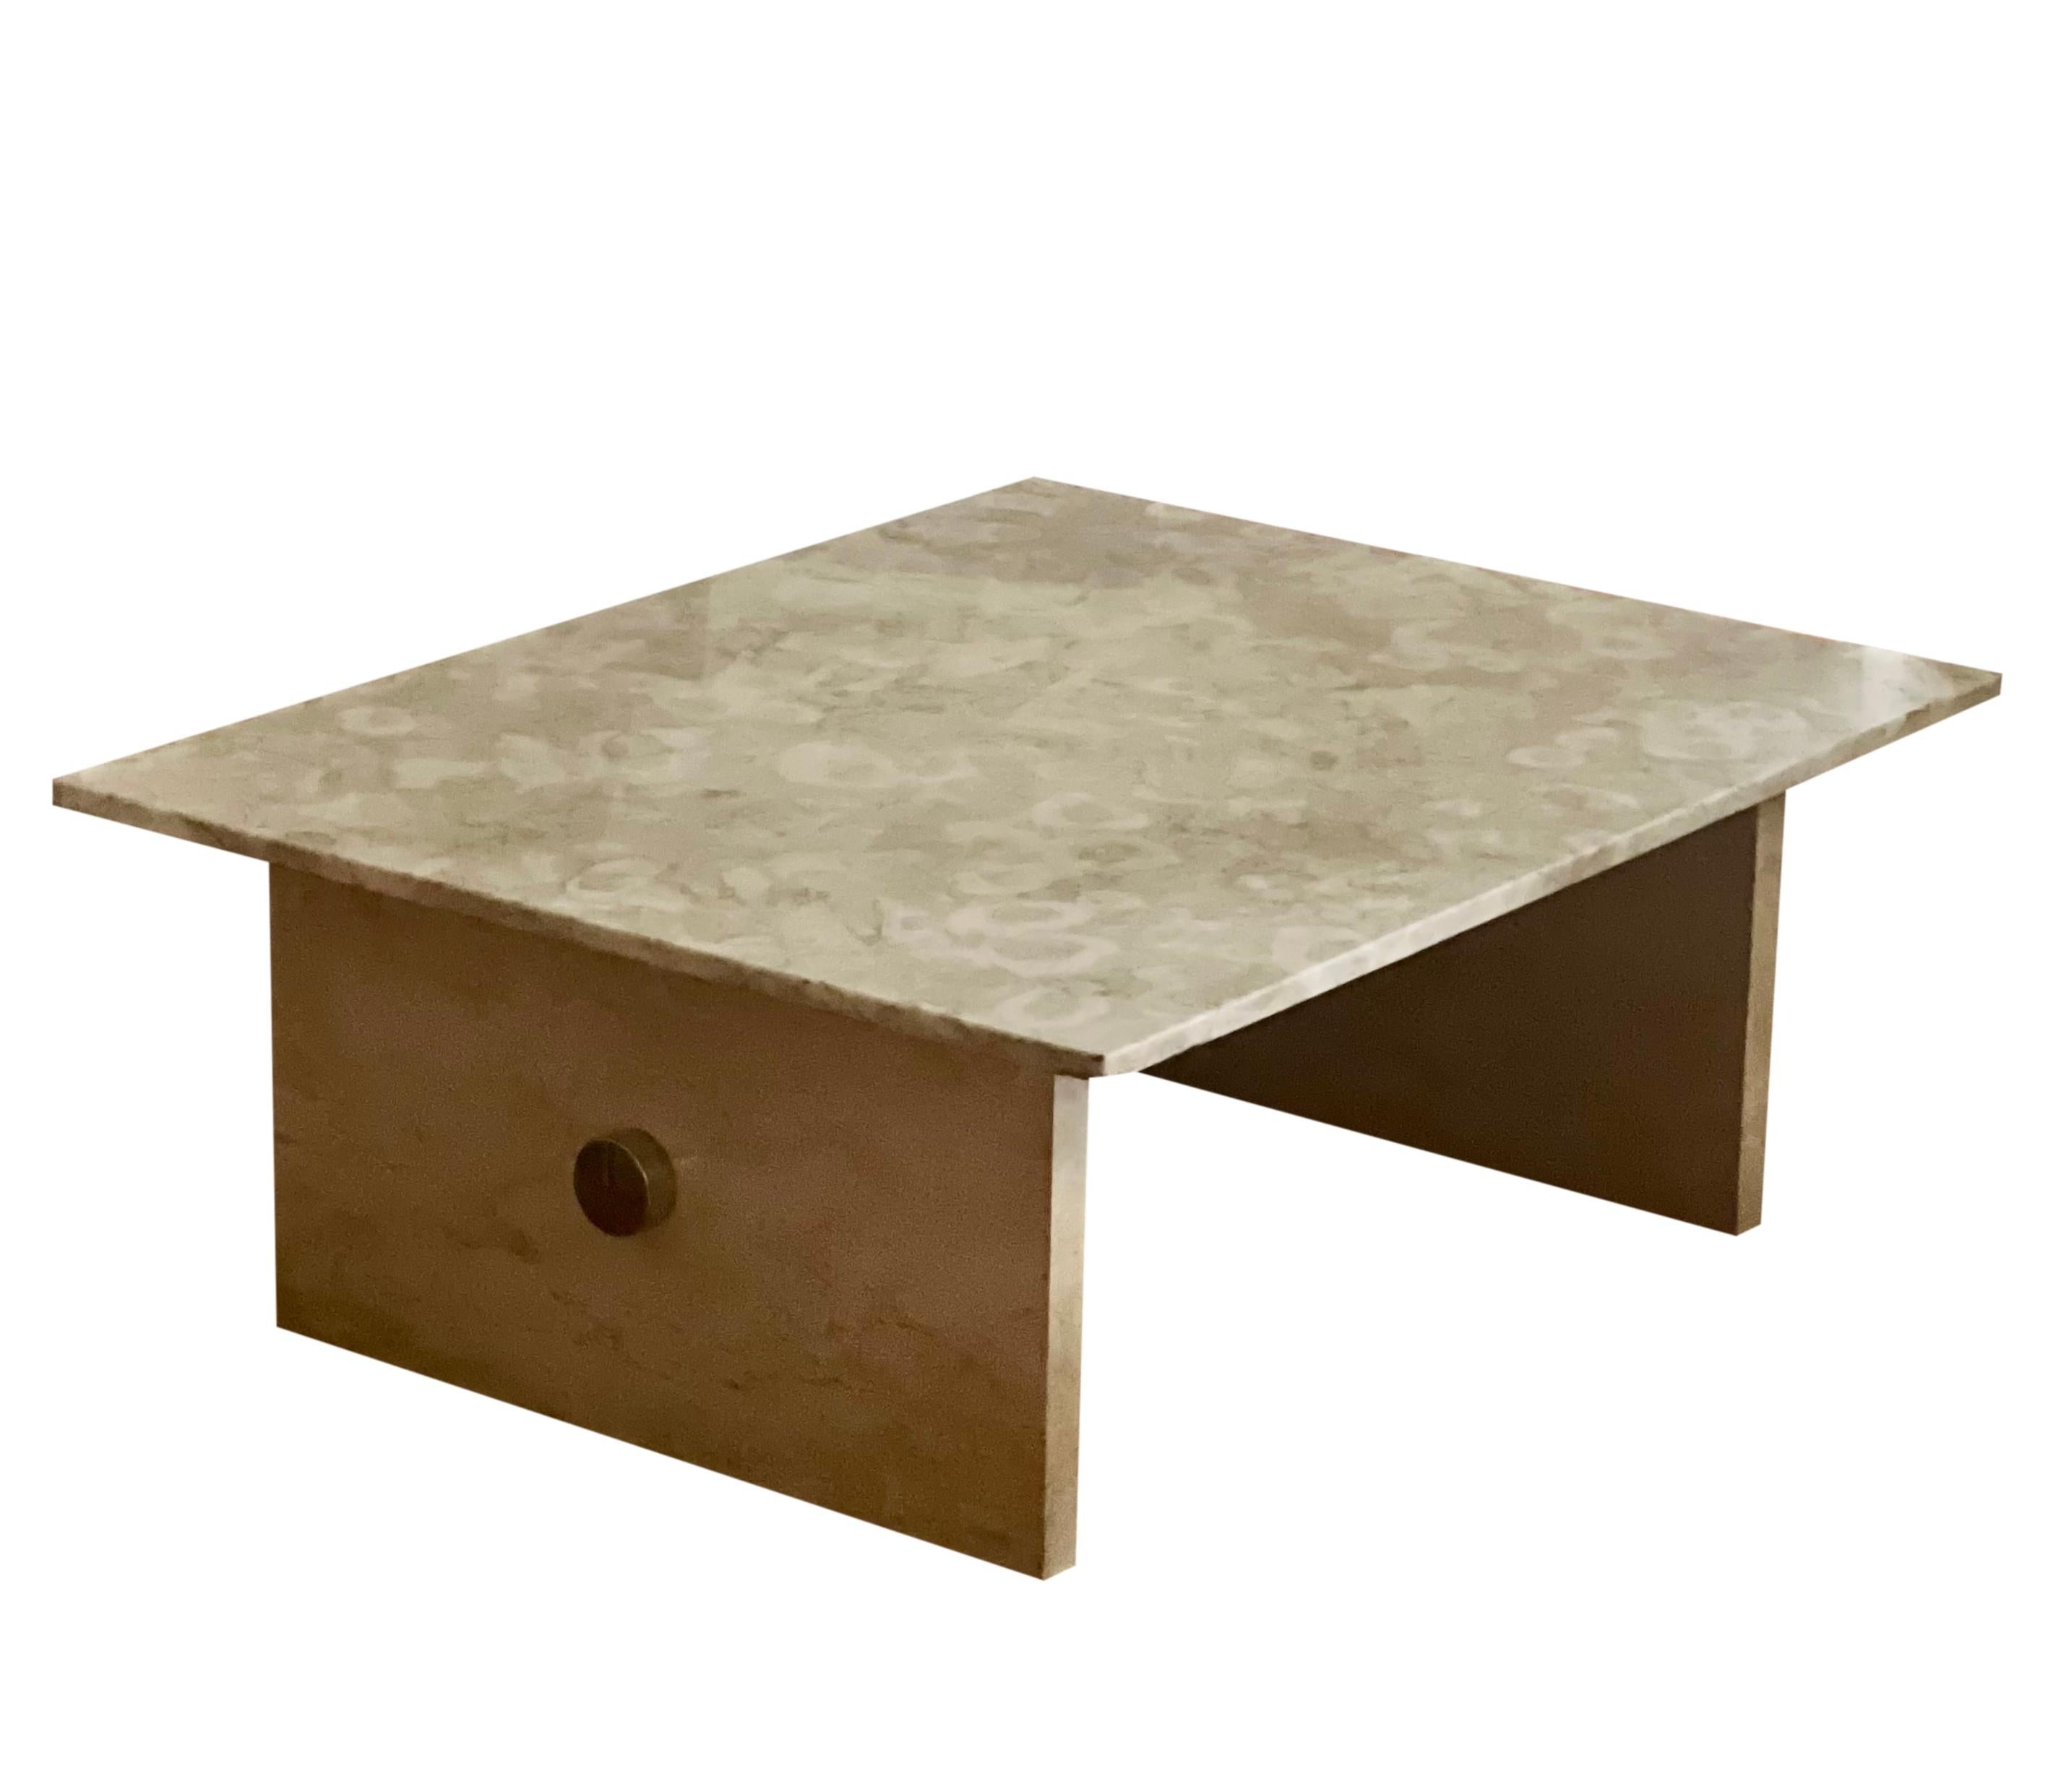 Exceptional modern solid marble and chrome coffee table.

Sleek design features double rectangular pedestals joined by a 3